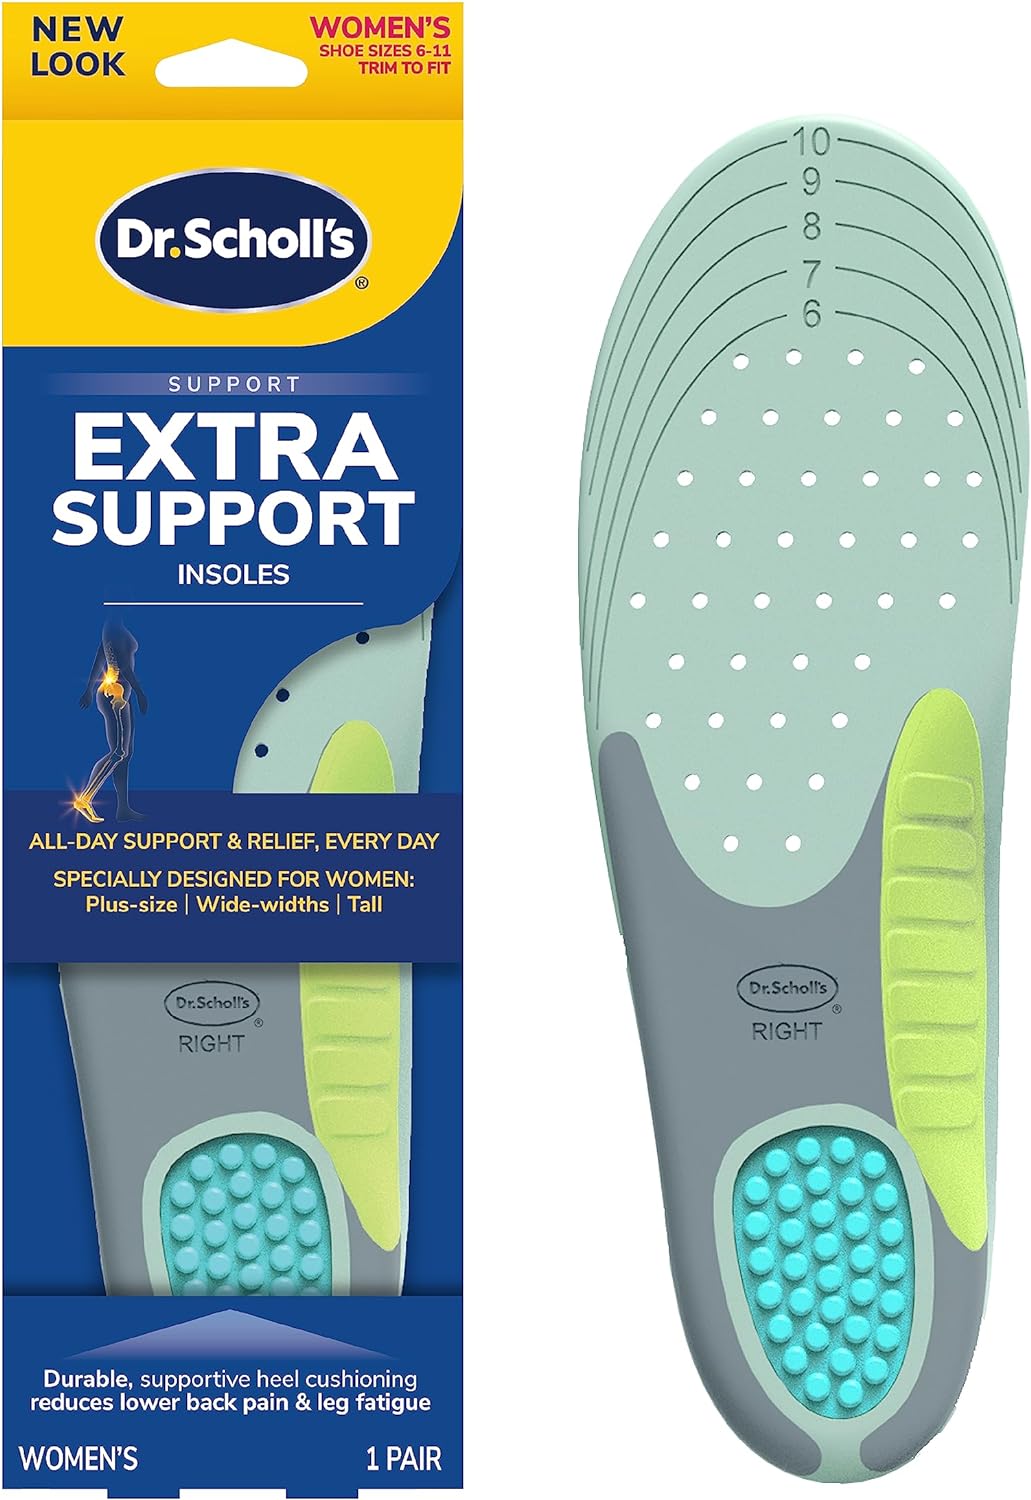 Dr. Scholls Extra Support Insoles for Women, Size 6-11, 1 Pair, Trim to Fit Inserts